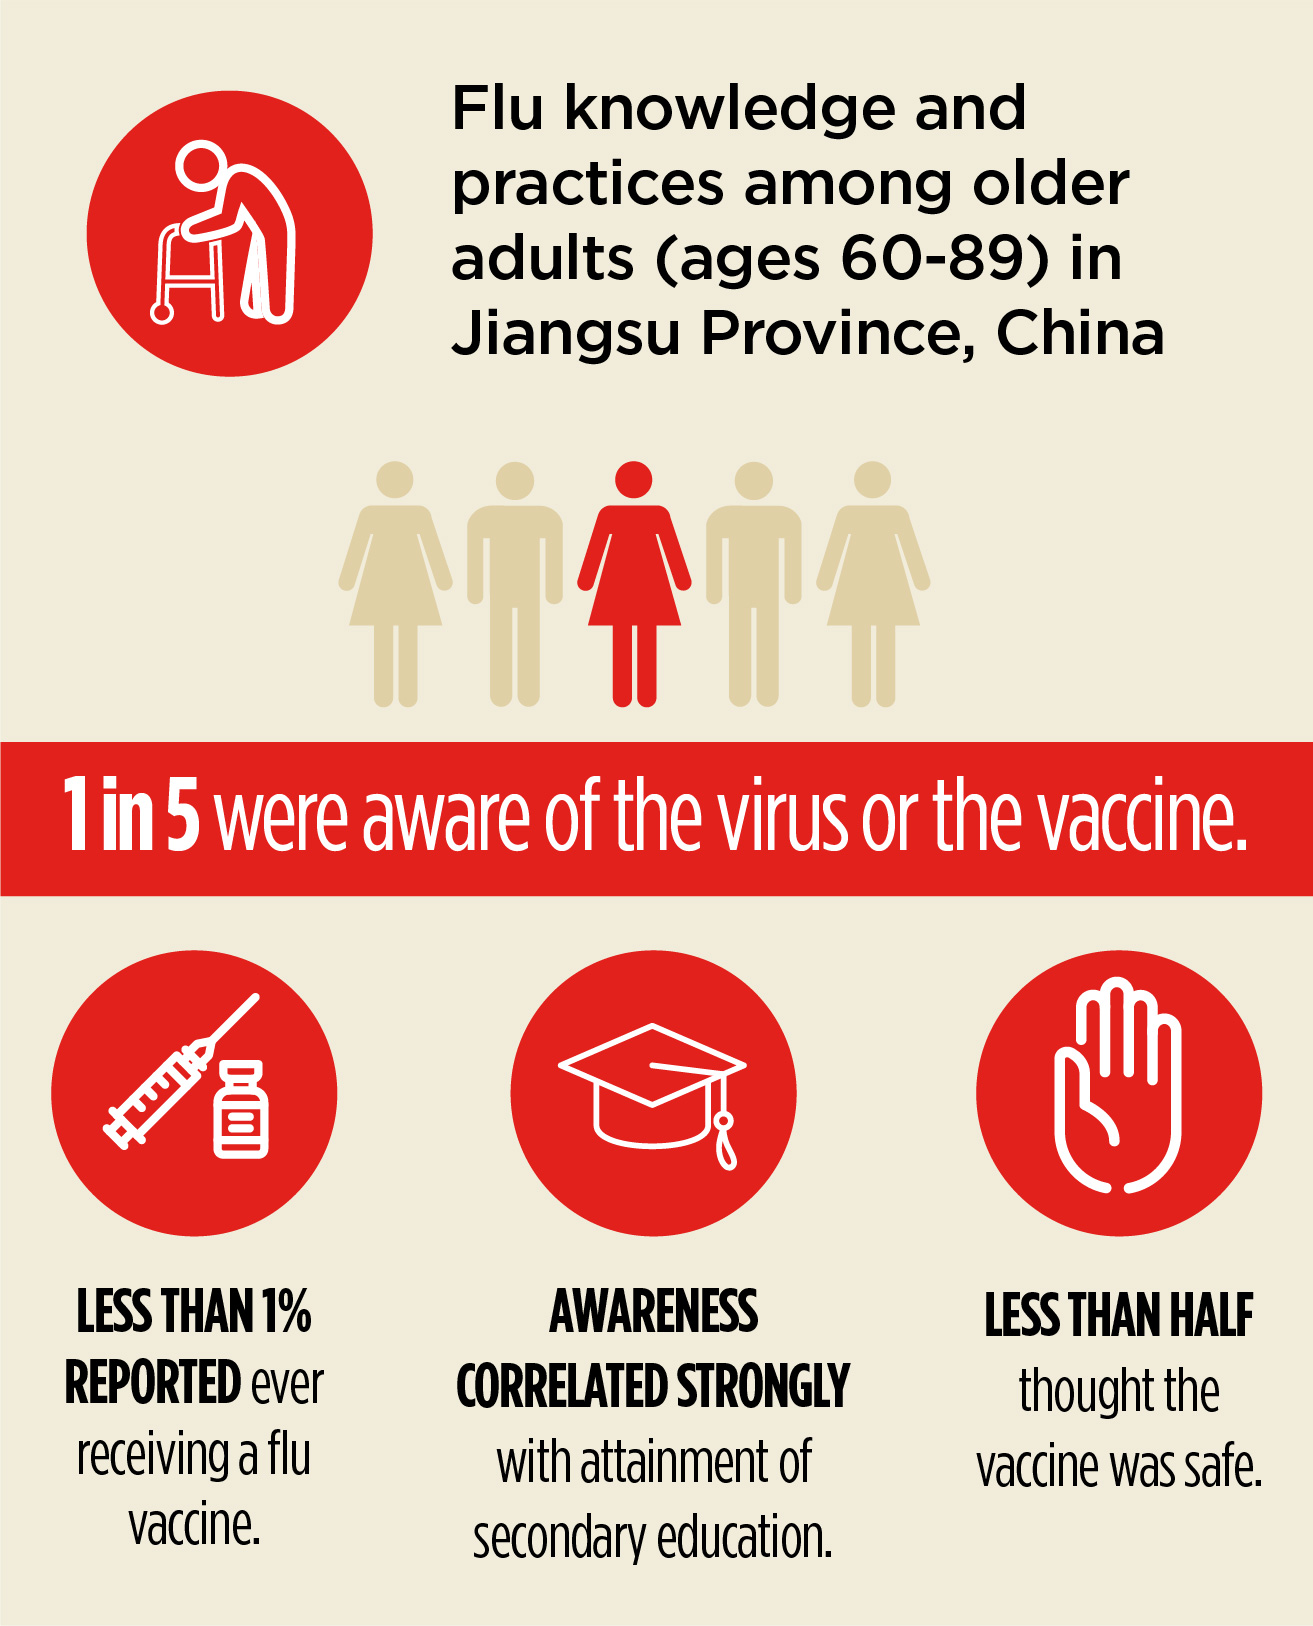 Influenza_flu_knowledge_older_adults_flu_knowledge_practices_older_adults